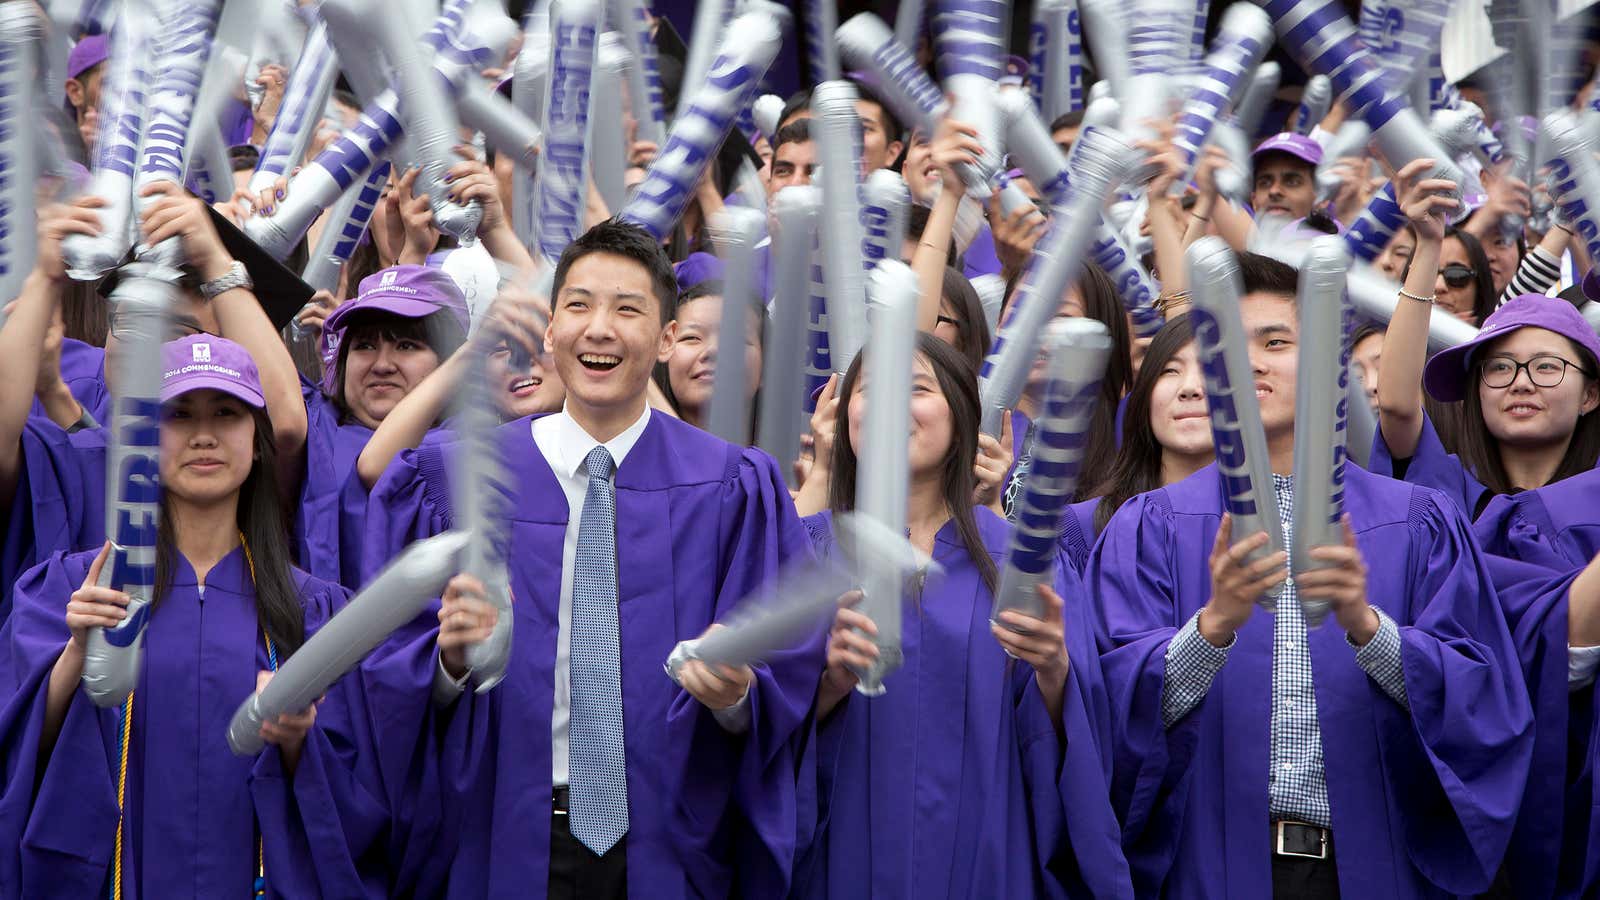 Graduates from New York University, which hosts the most international students in the US.